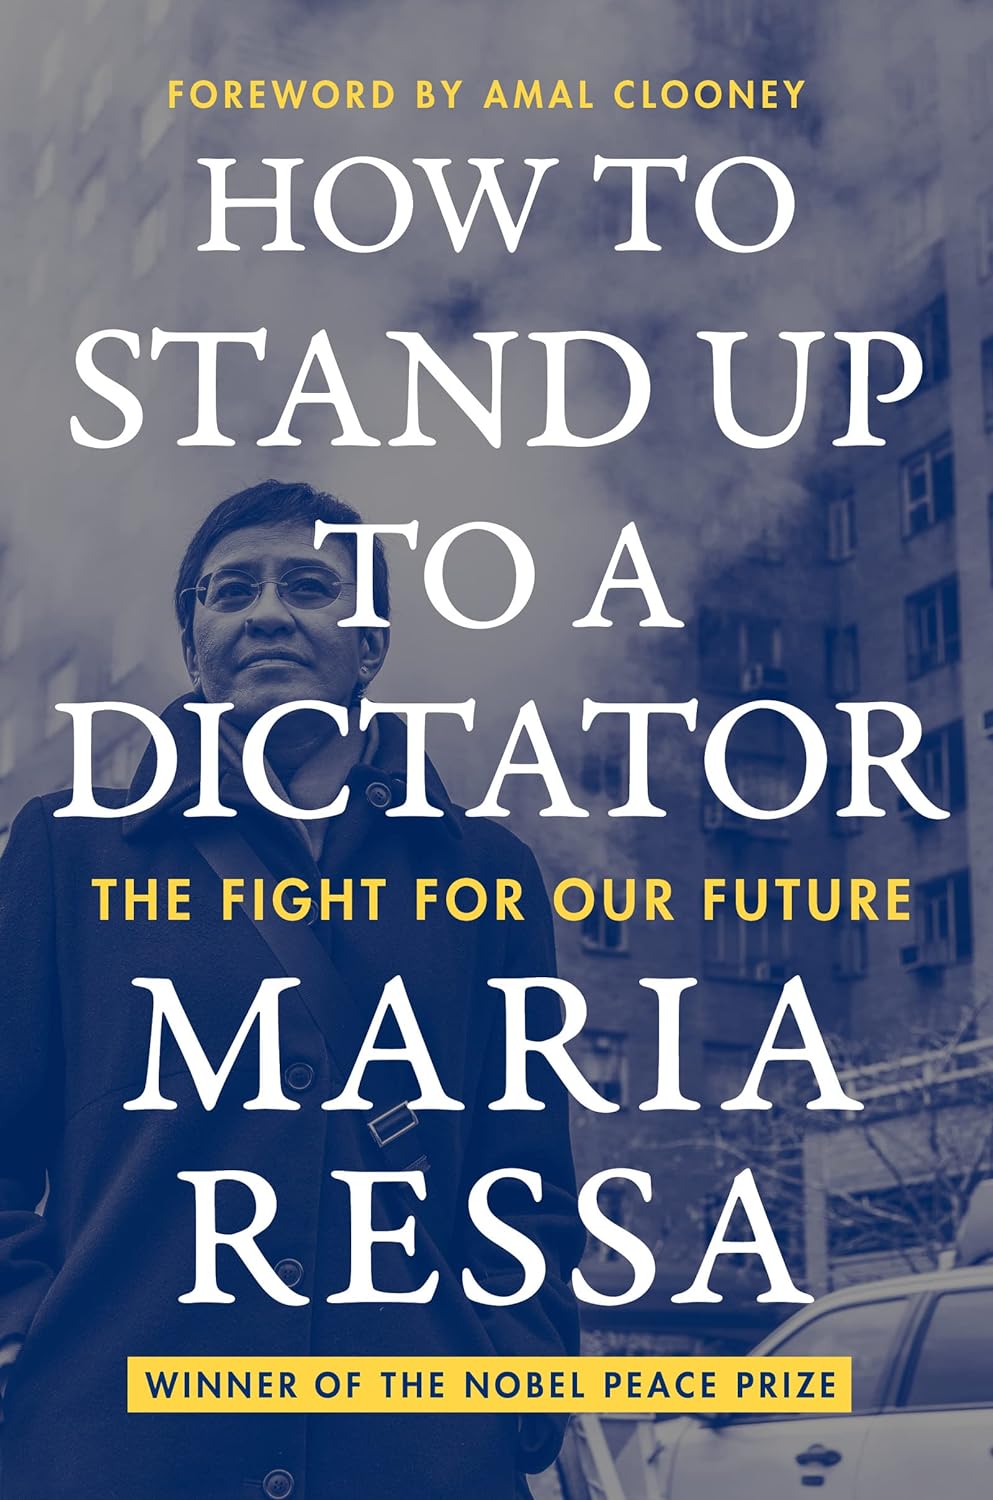 Image for "How to Stand Up to a Dictator: The Fight for Our Future"